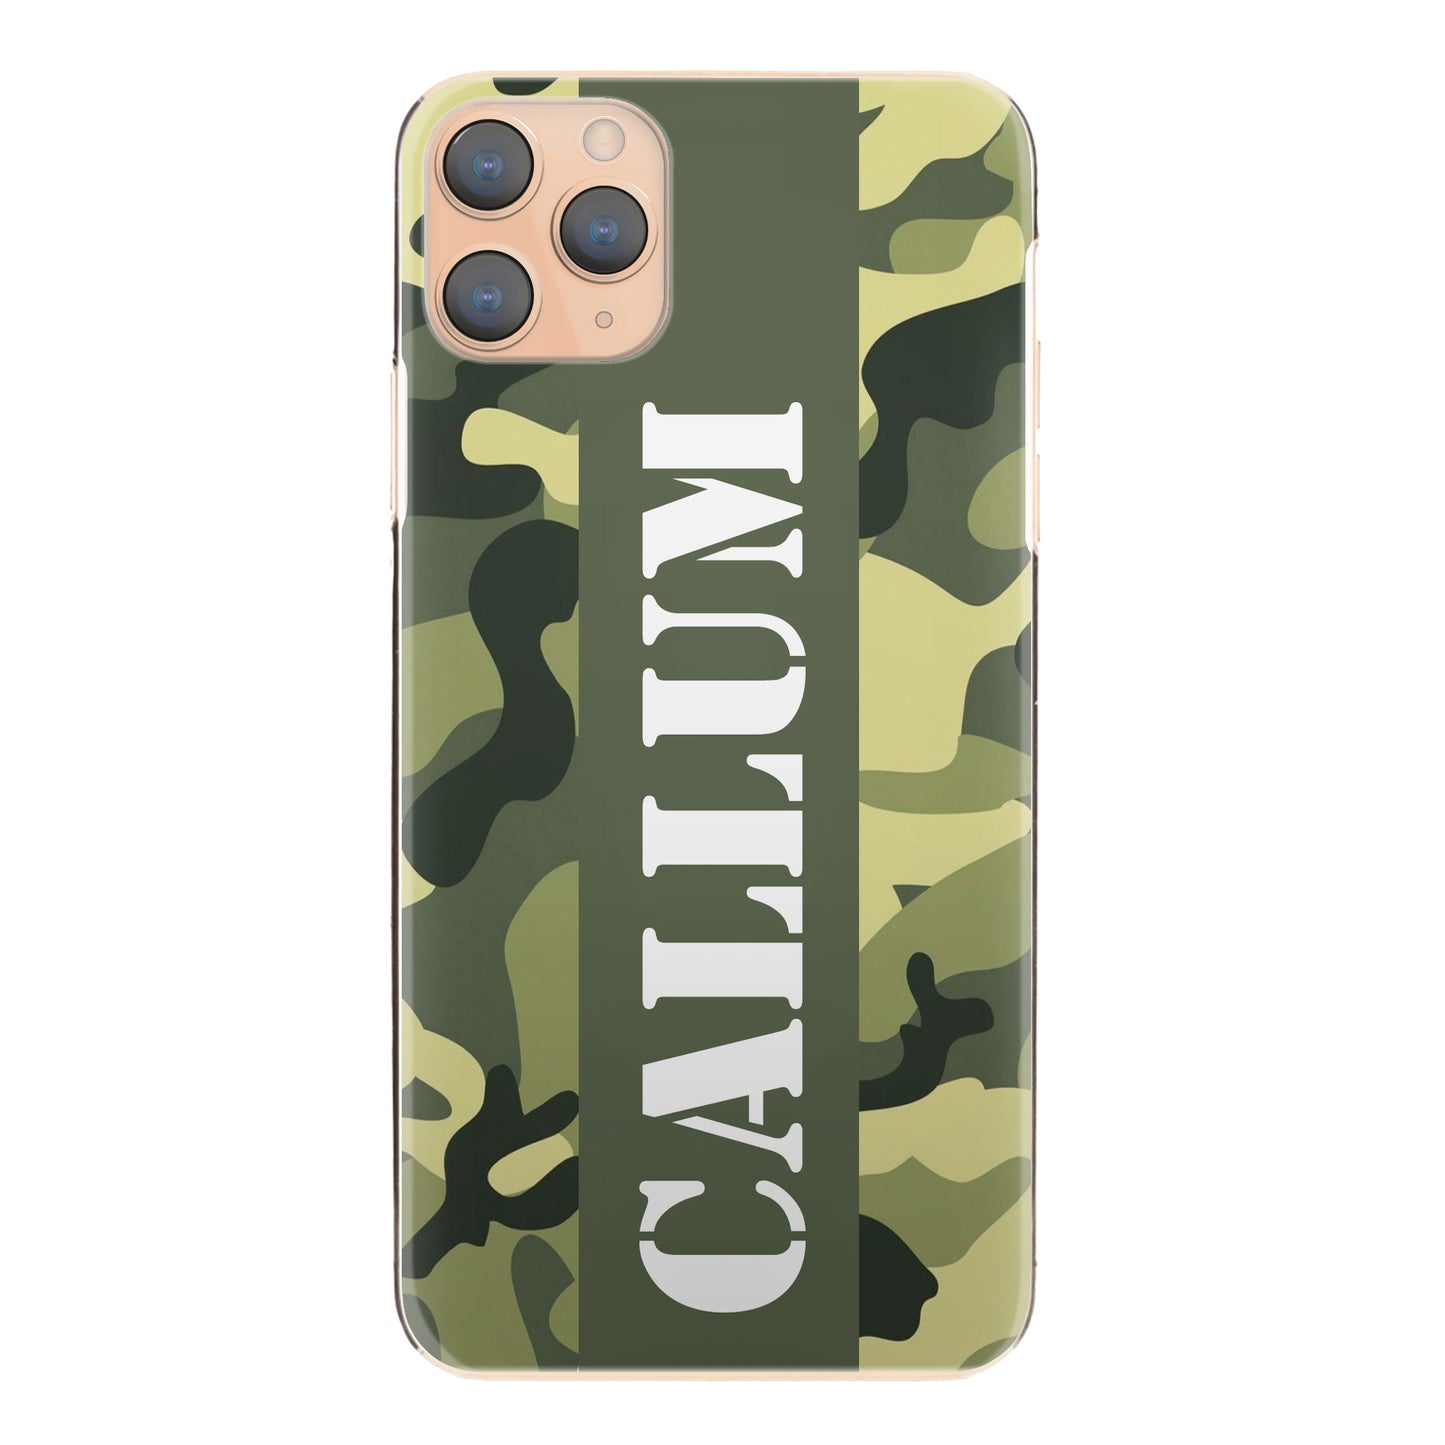 Personalised One Phone Hard Case with Military Text on Classic Green Camo